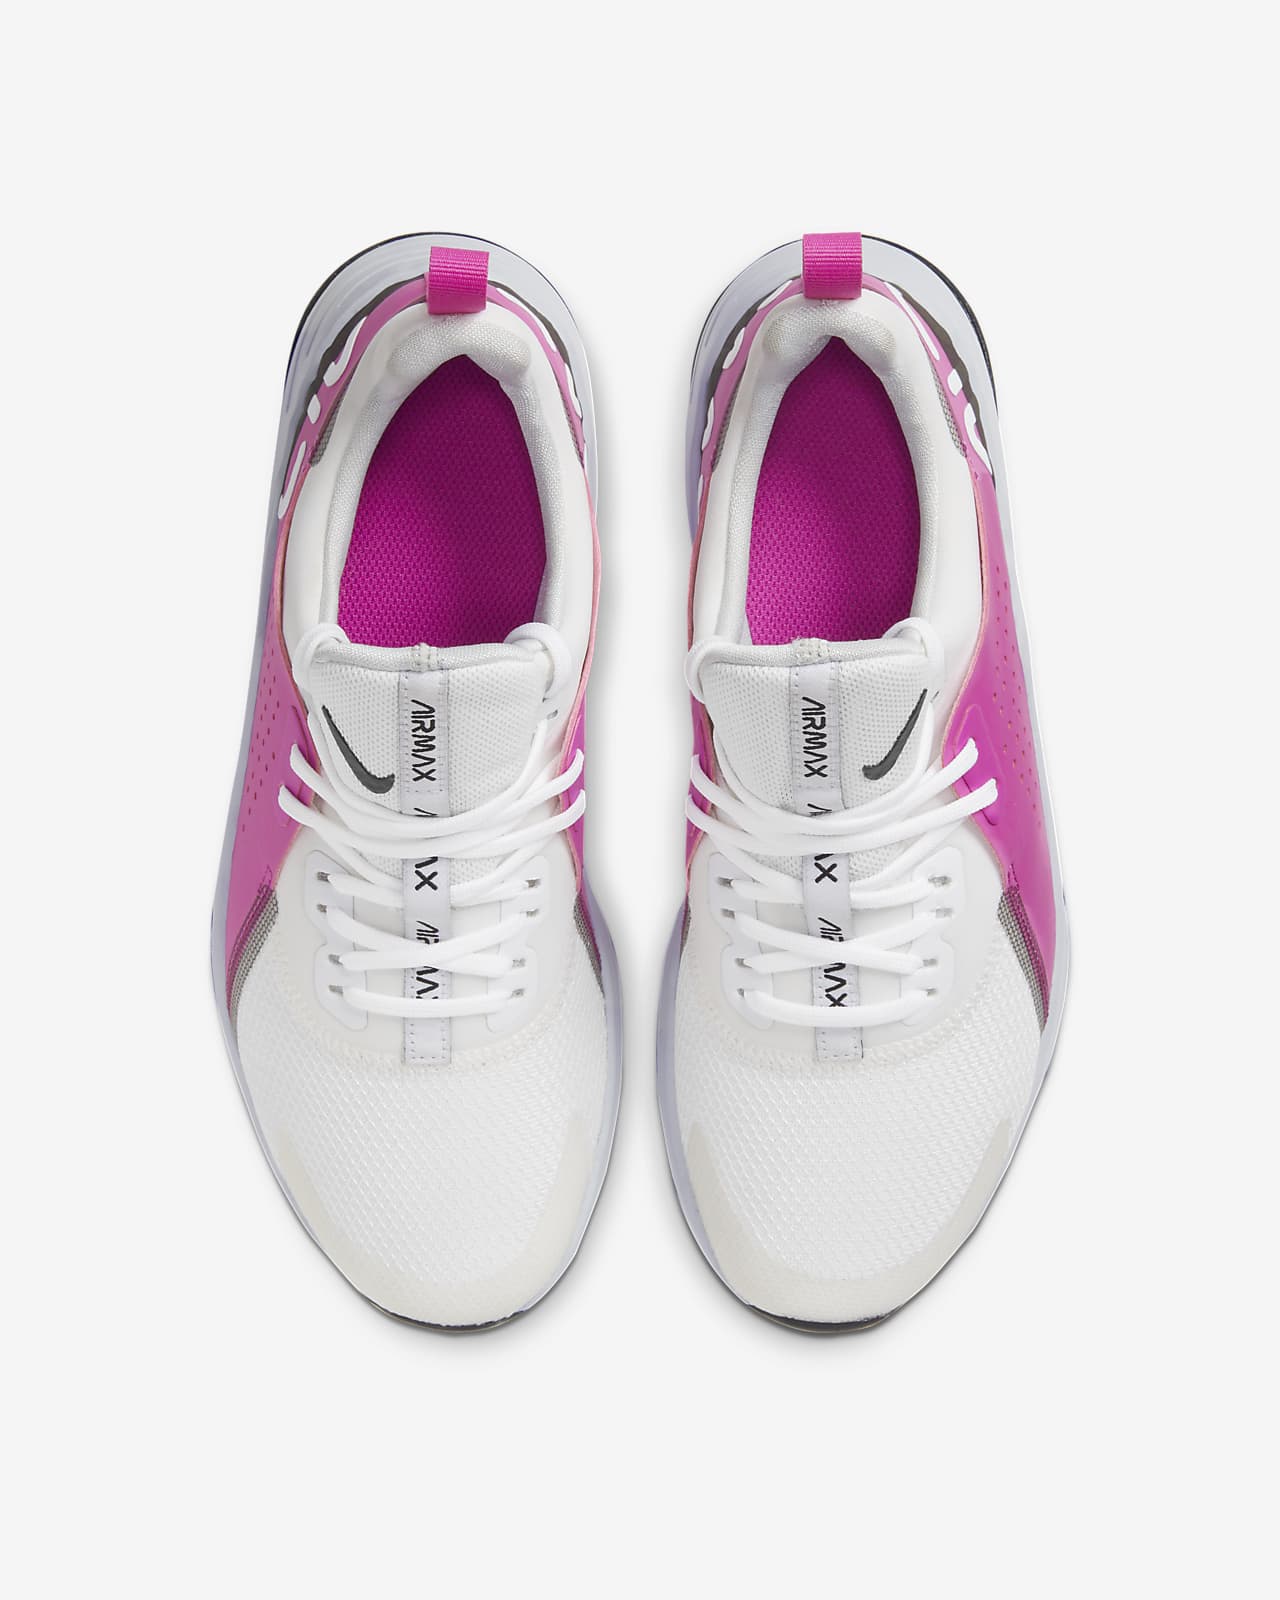 nike training air max bella 3 trainers in pink